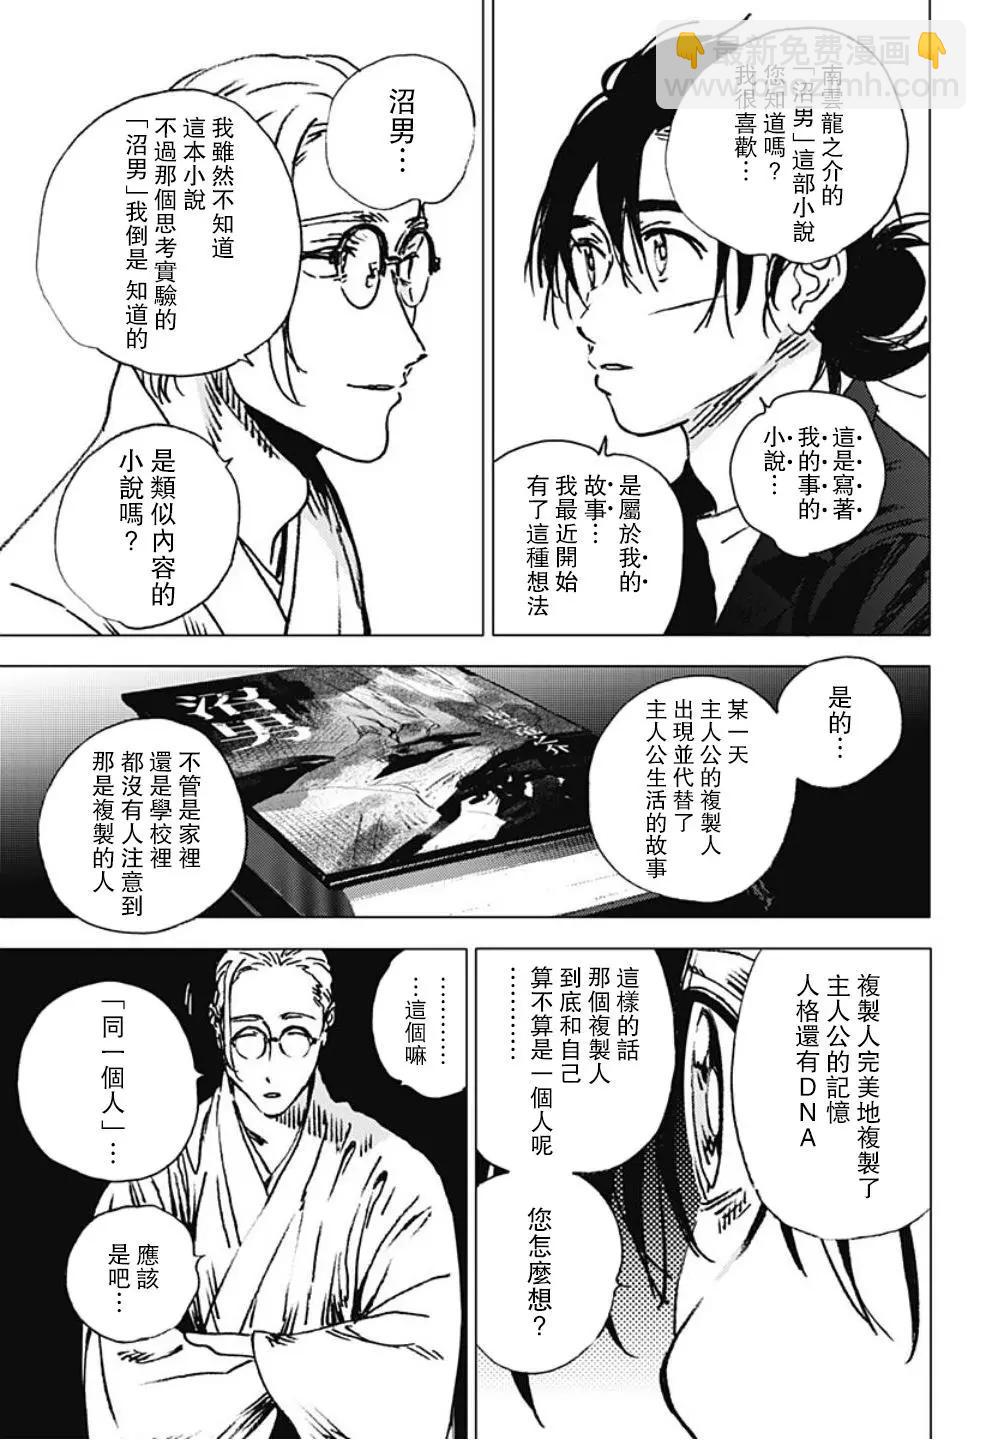 Summer time rendering - 第94話 - 2